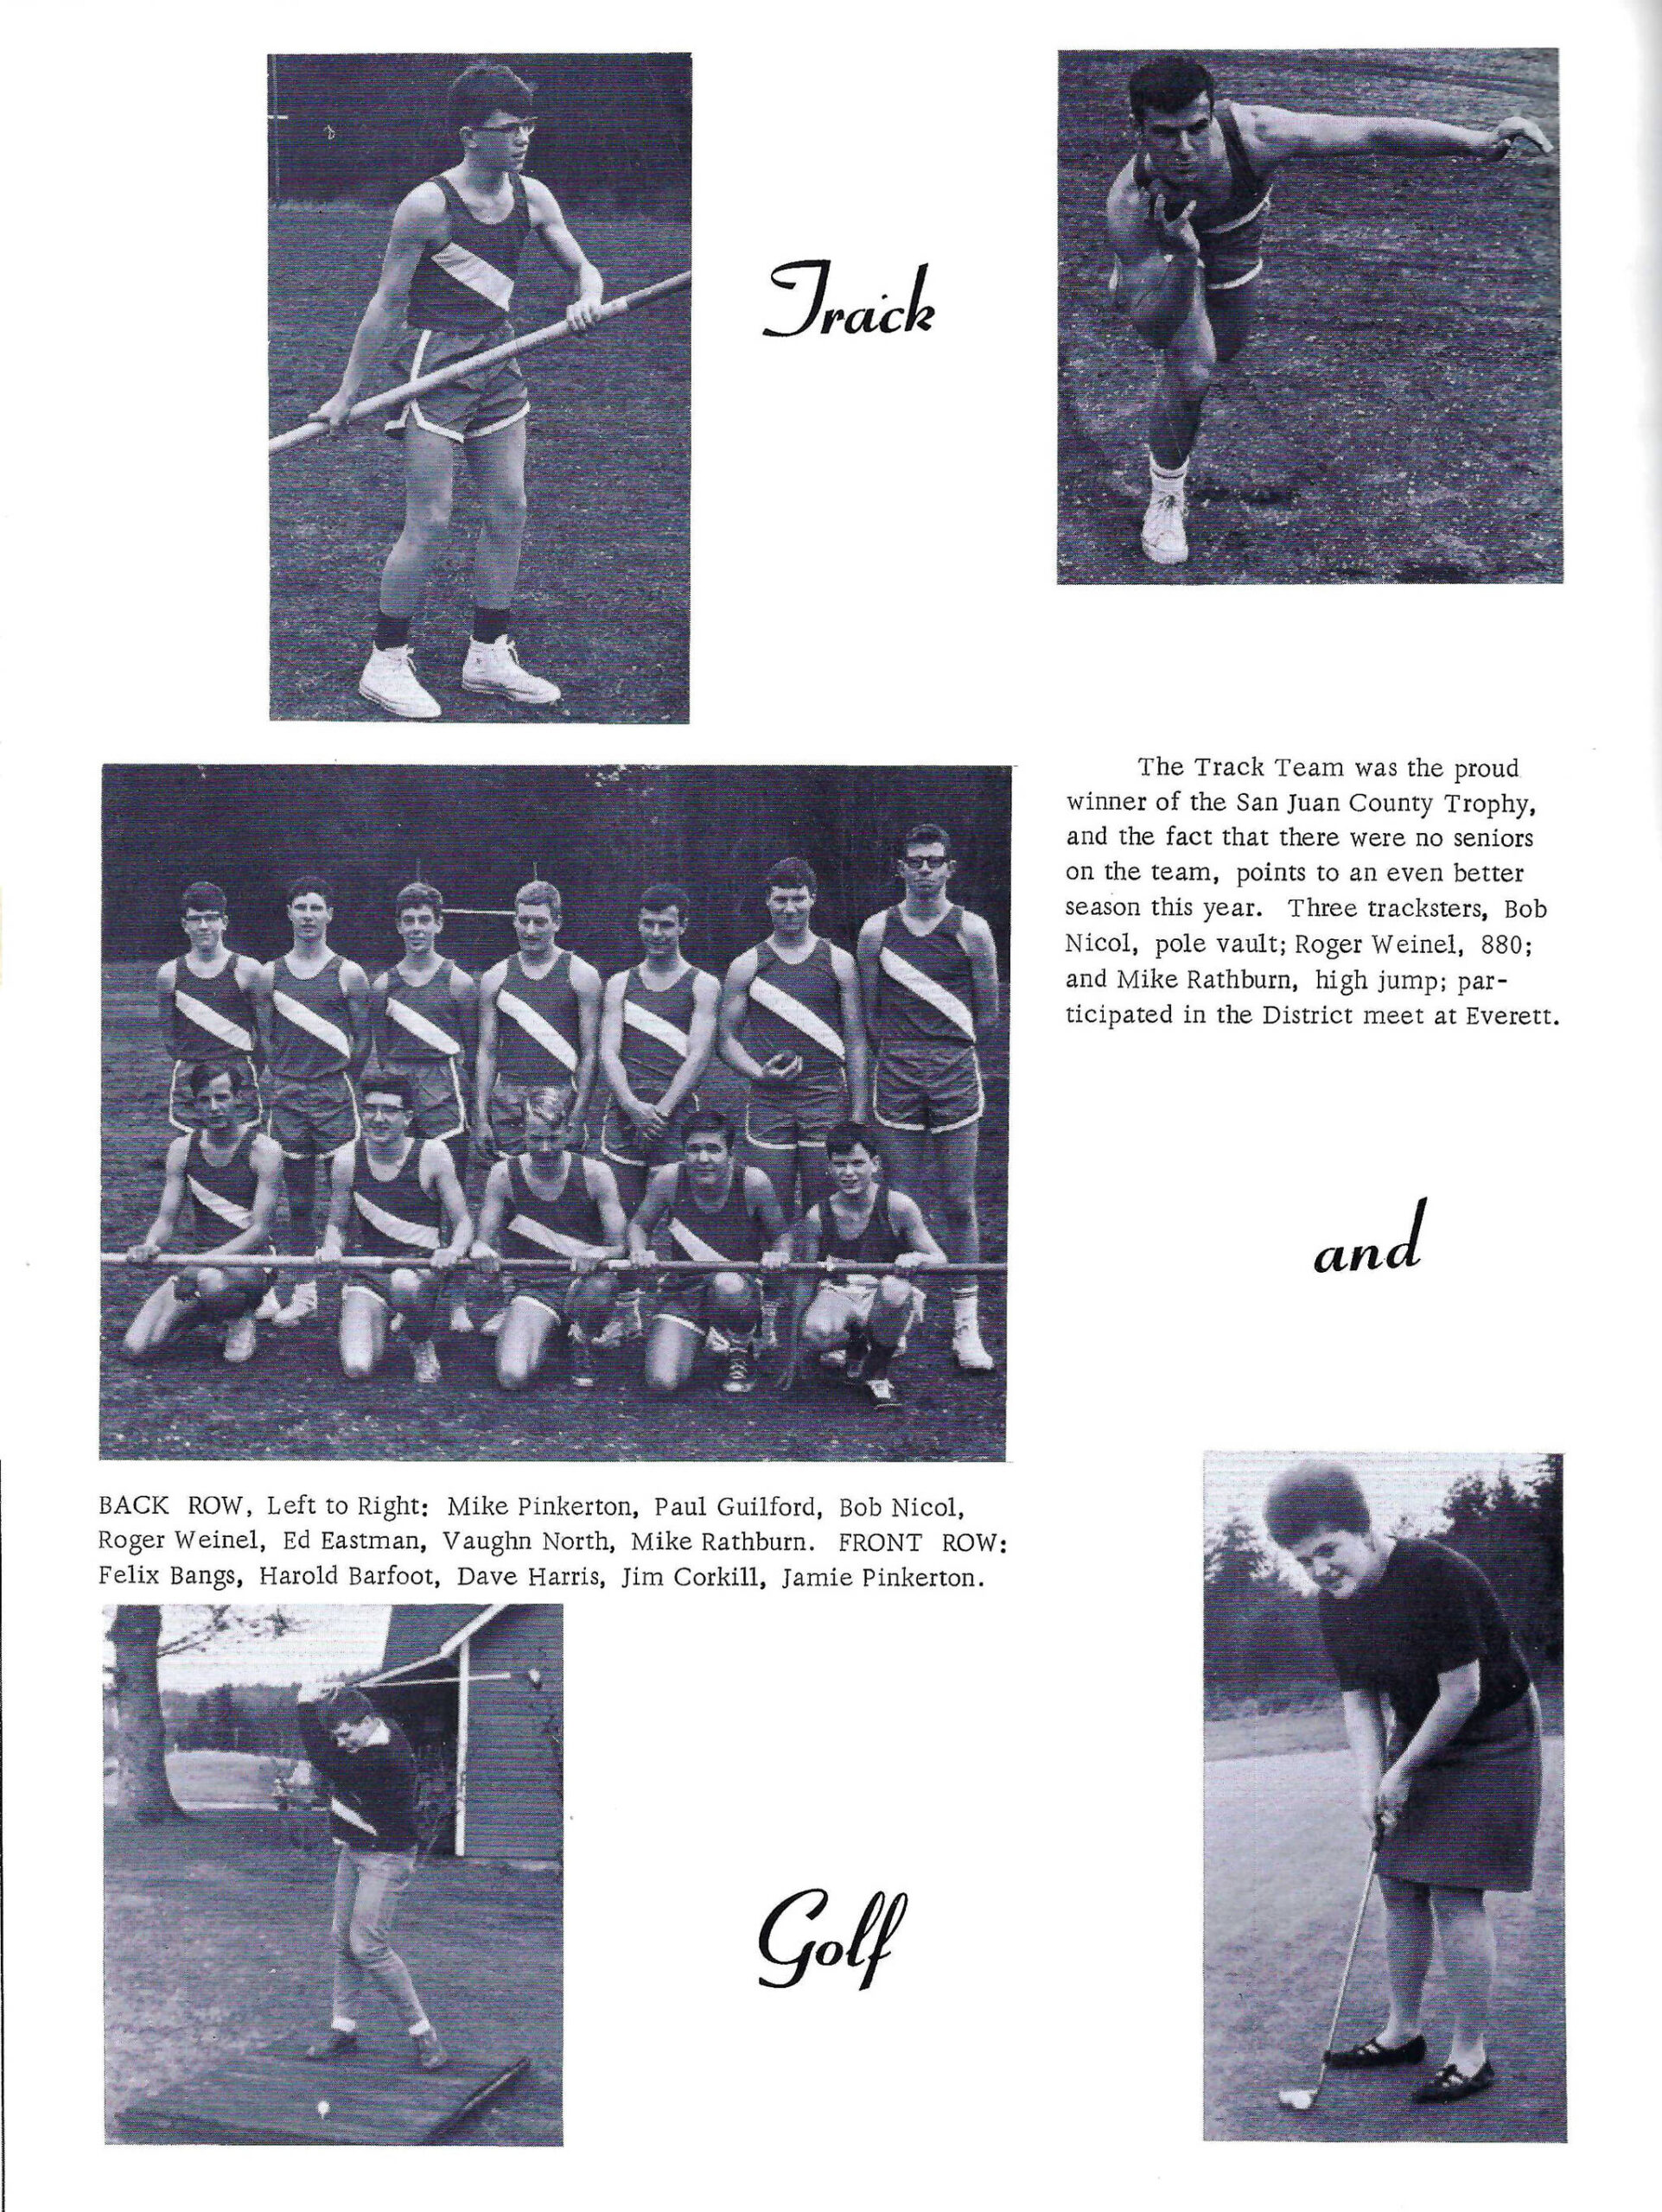 1967 OIHS yearbook.